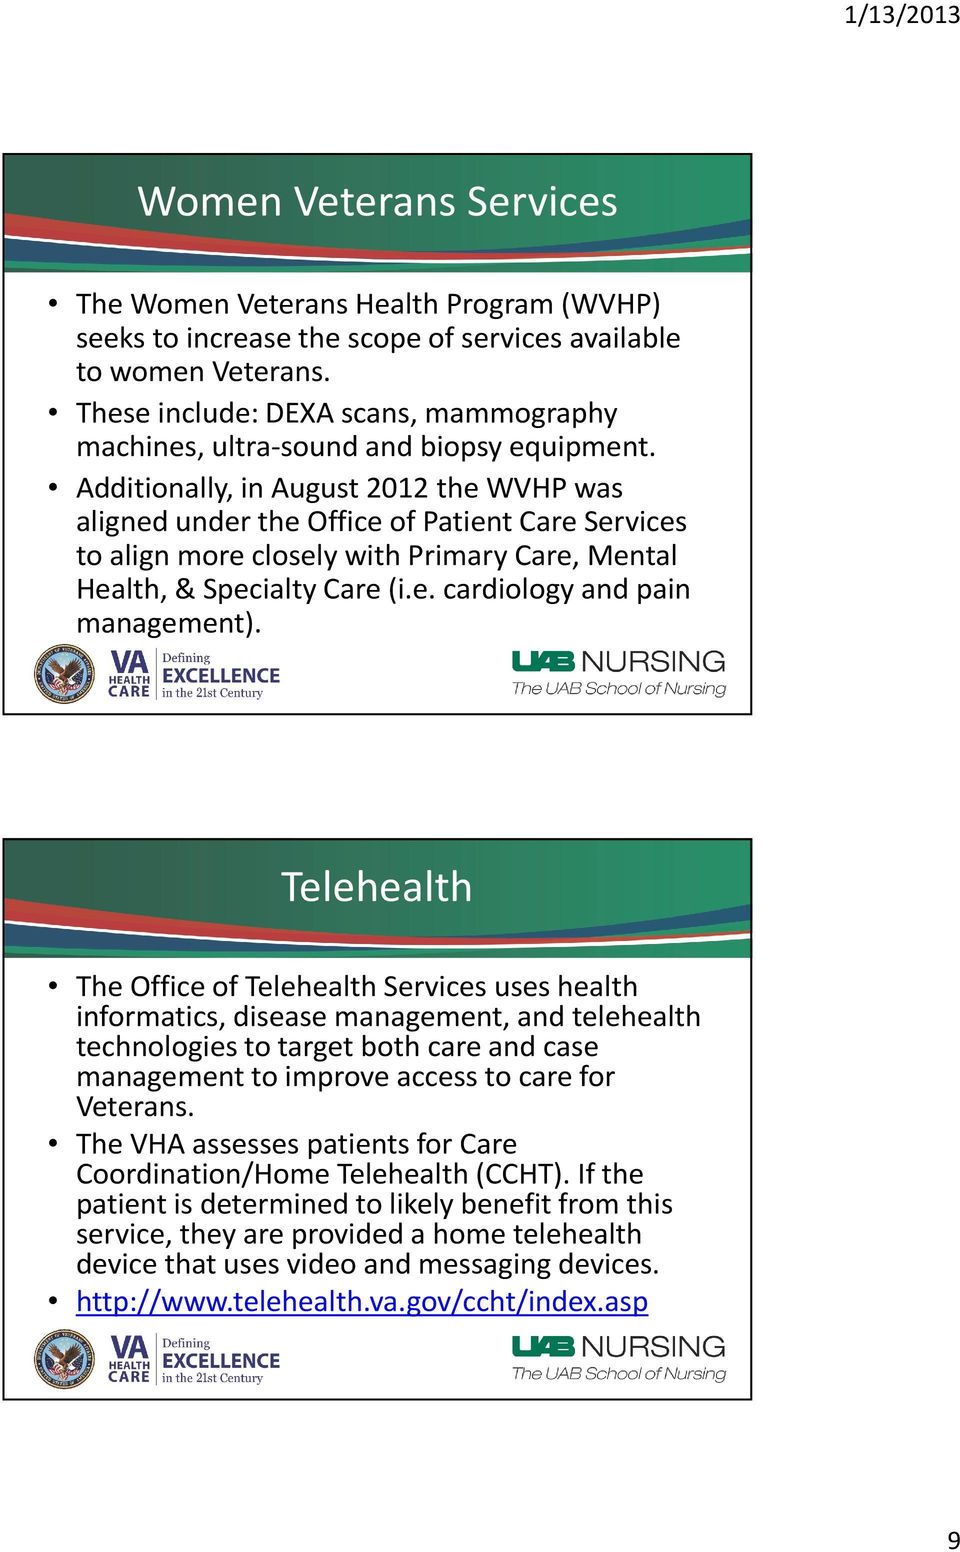 Additionally, in August 2012 the WVHP was aligned under the Office of Patient Care Services to align more closely with Primary Care, Mental Health, & Specialty Care (i.e. cardiology and pain management).